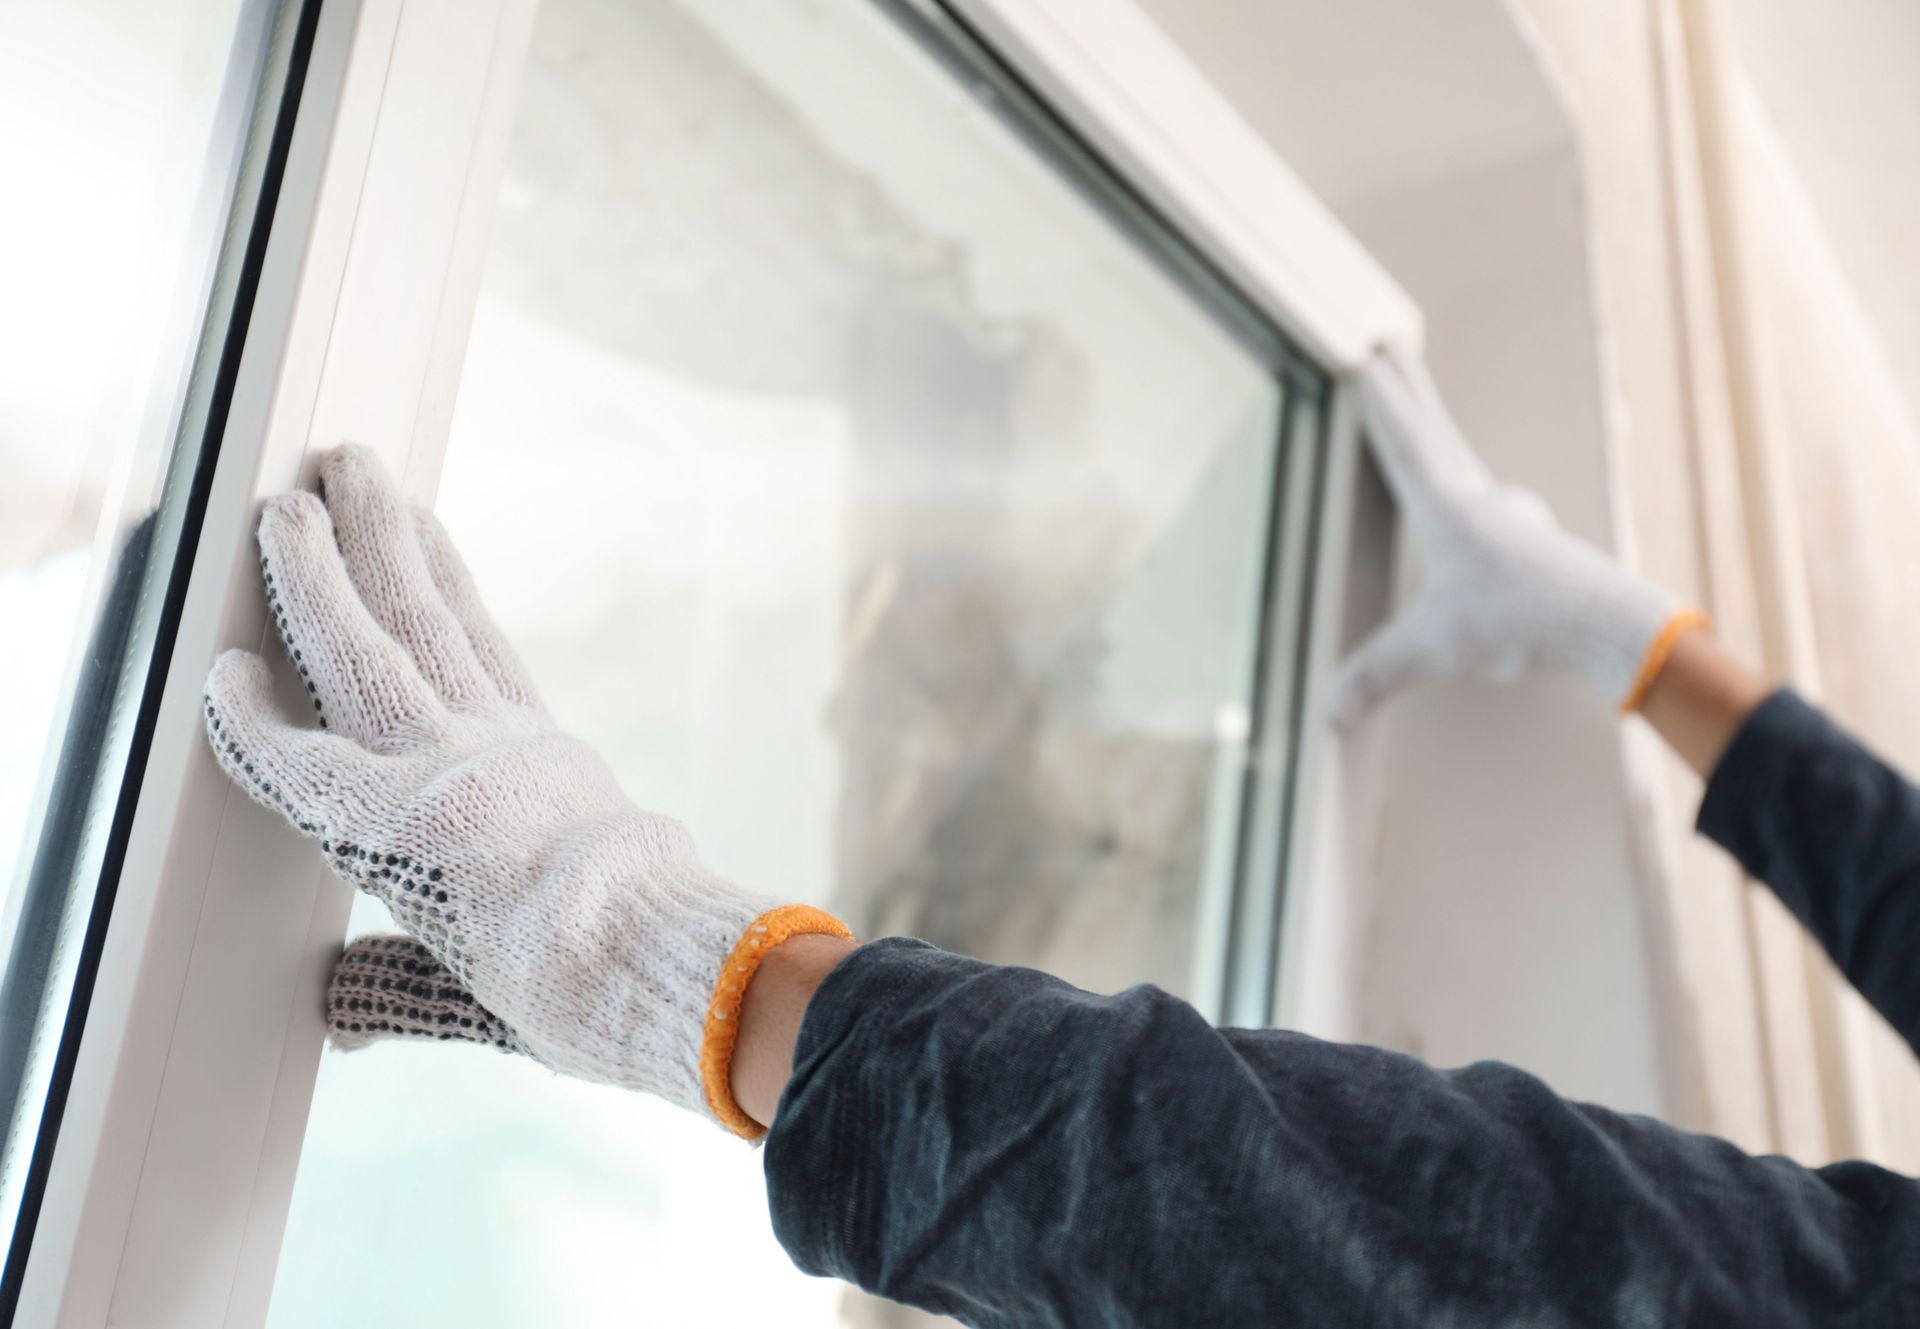 A person wearing gloves is cleaning a window.